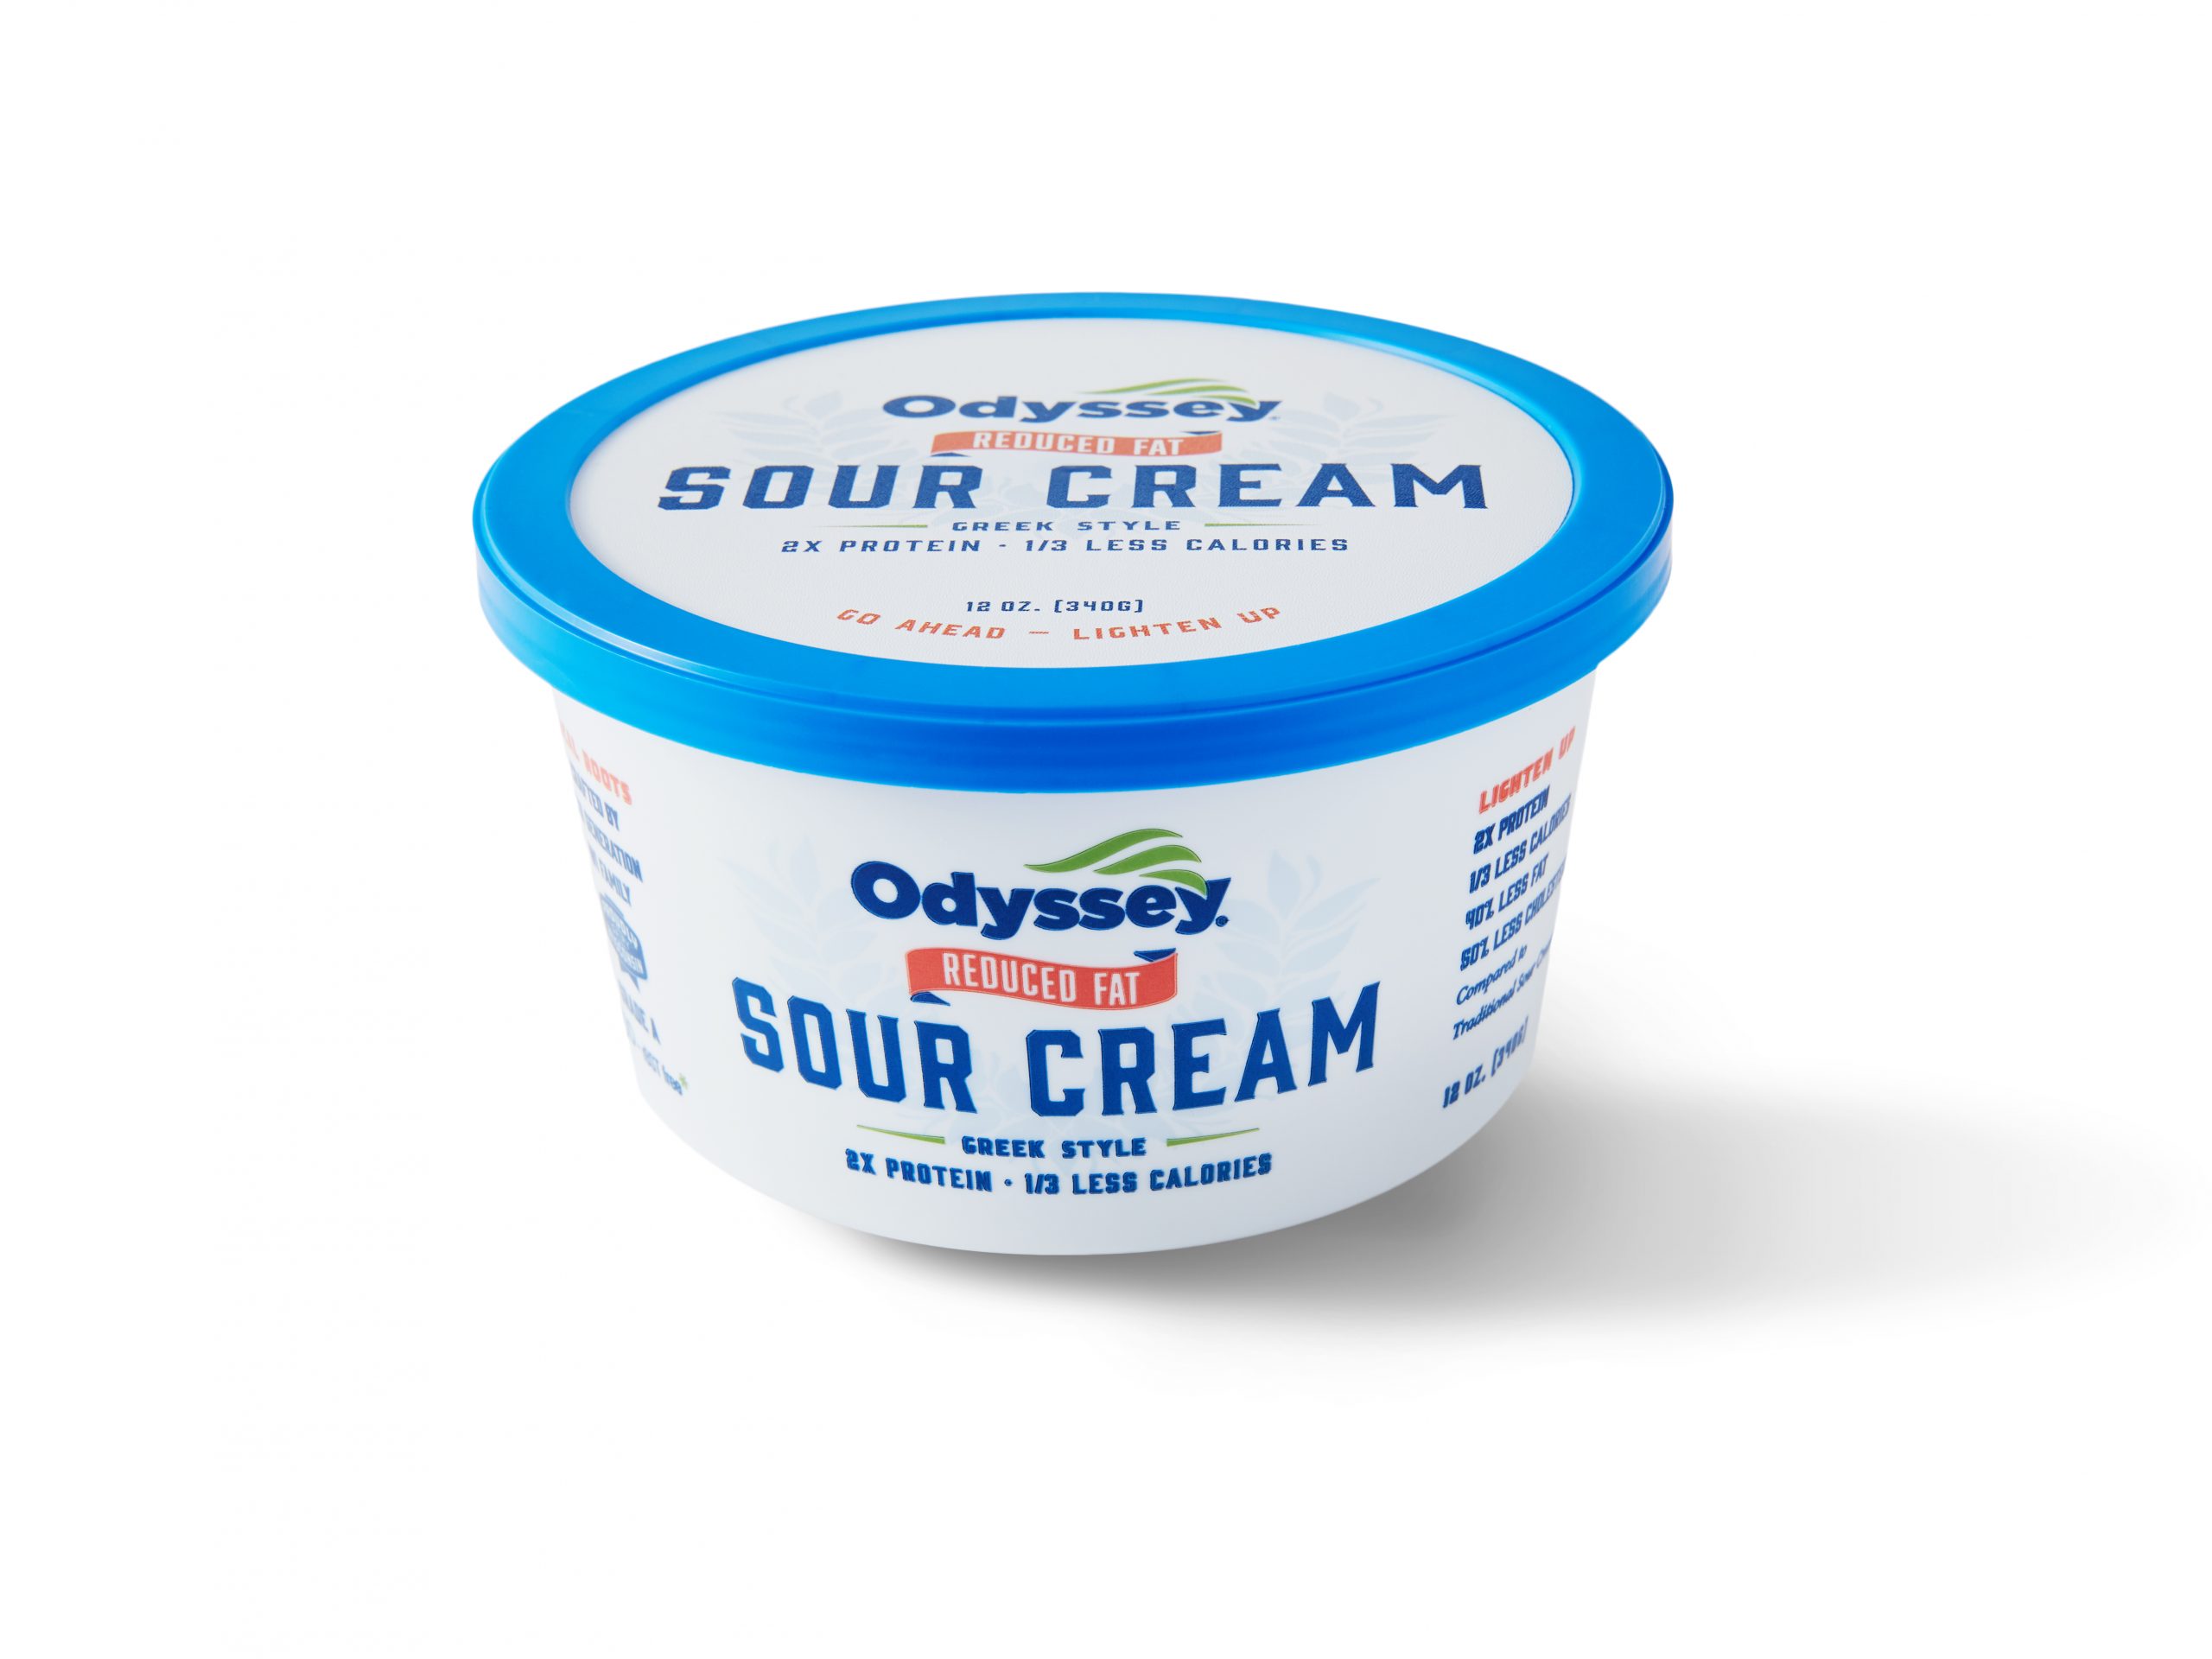 Odyssey Brands Products Reduced Fat Sour Cream